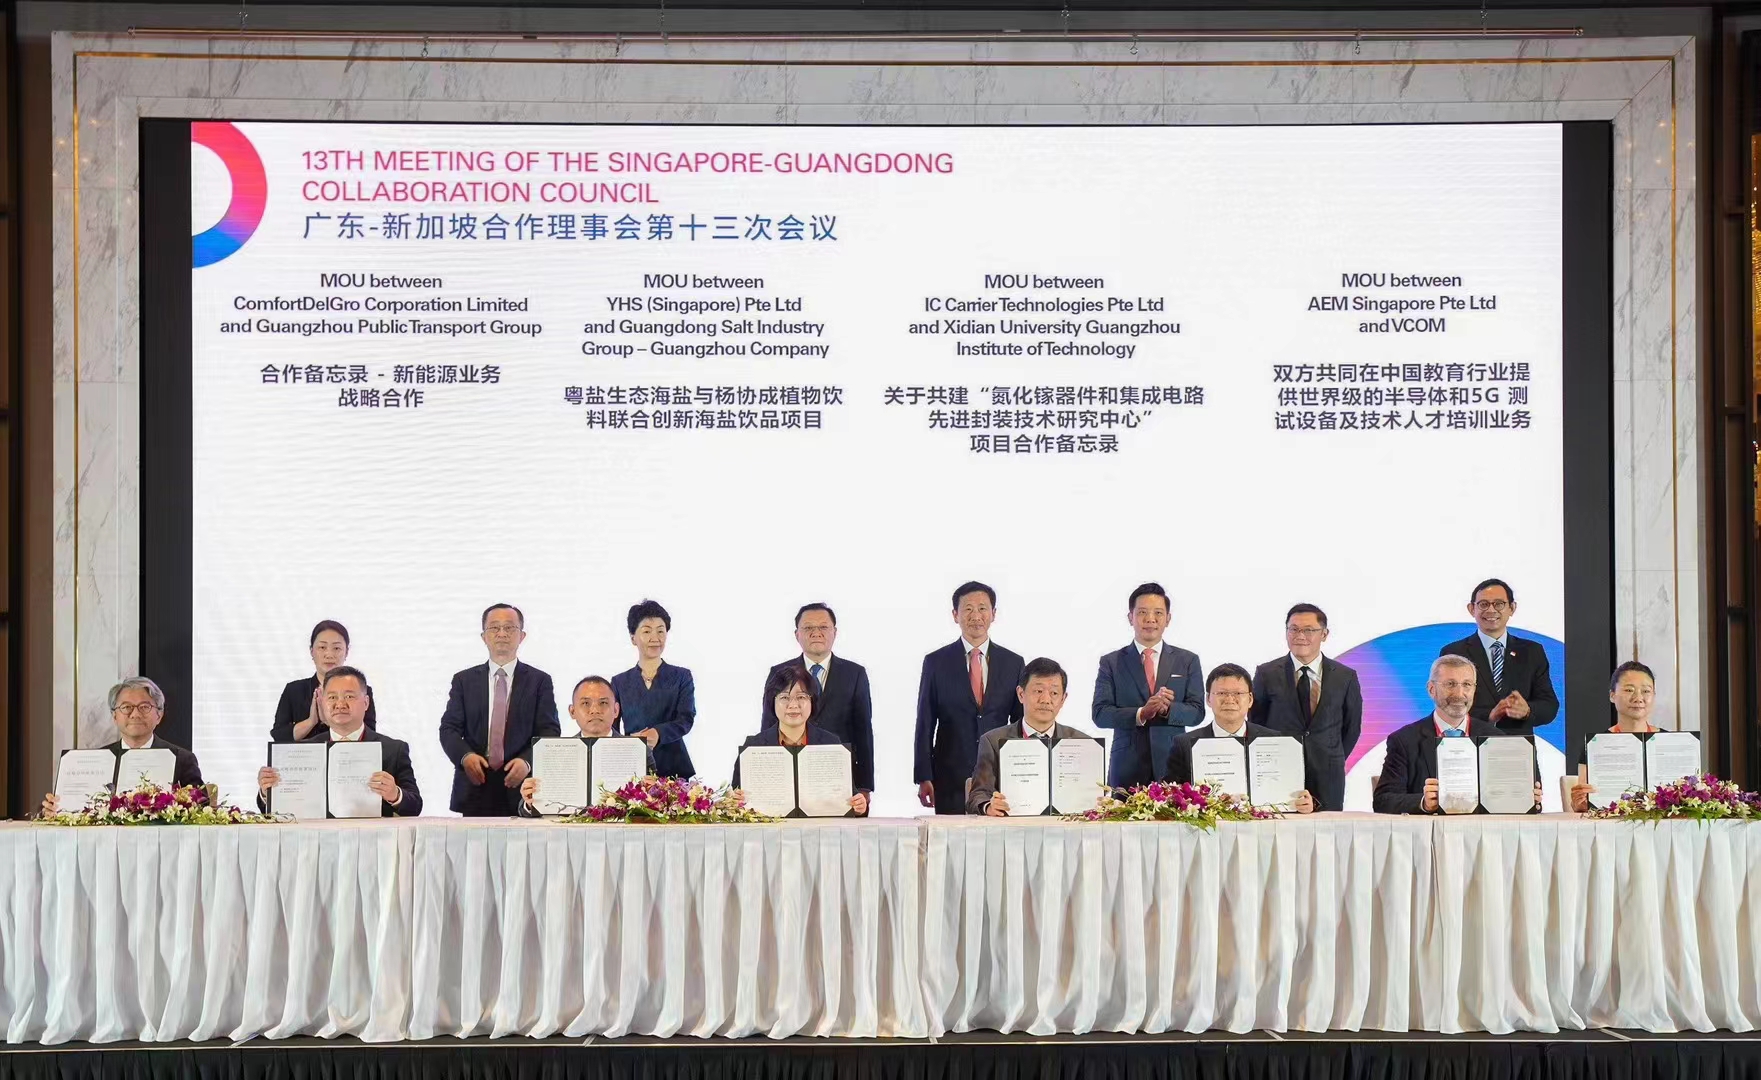 13TH MEETING OF THE SINGAPORE-GUANGDONG COLLABORATION COUNCIL